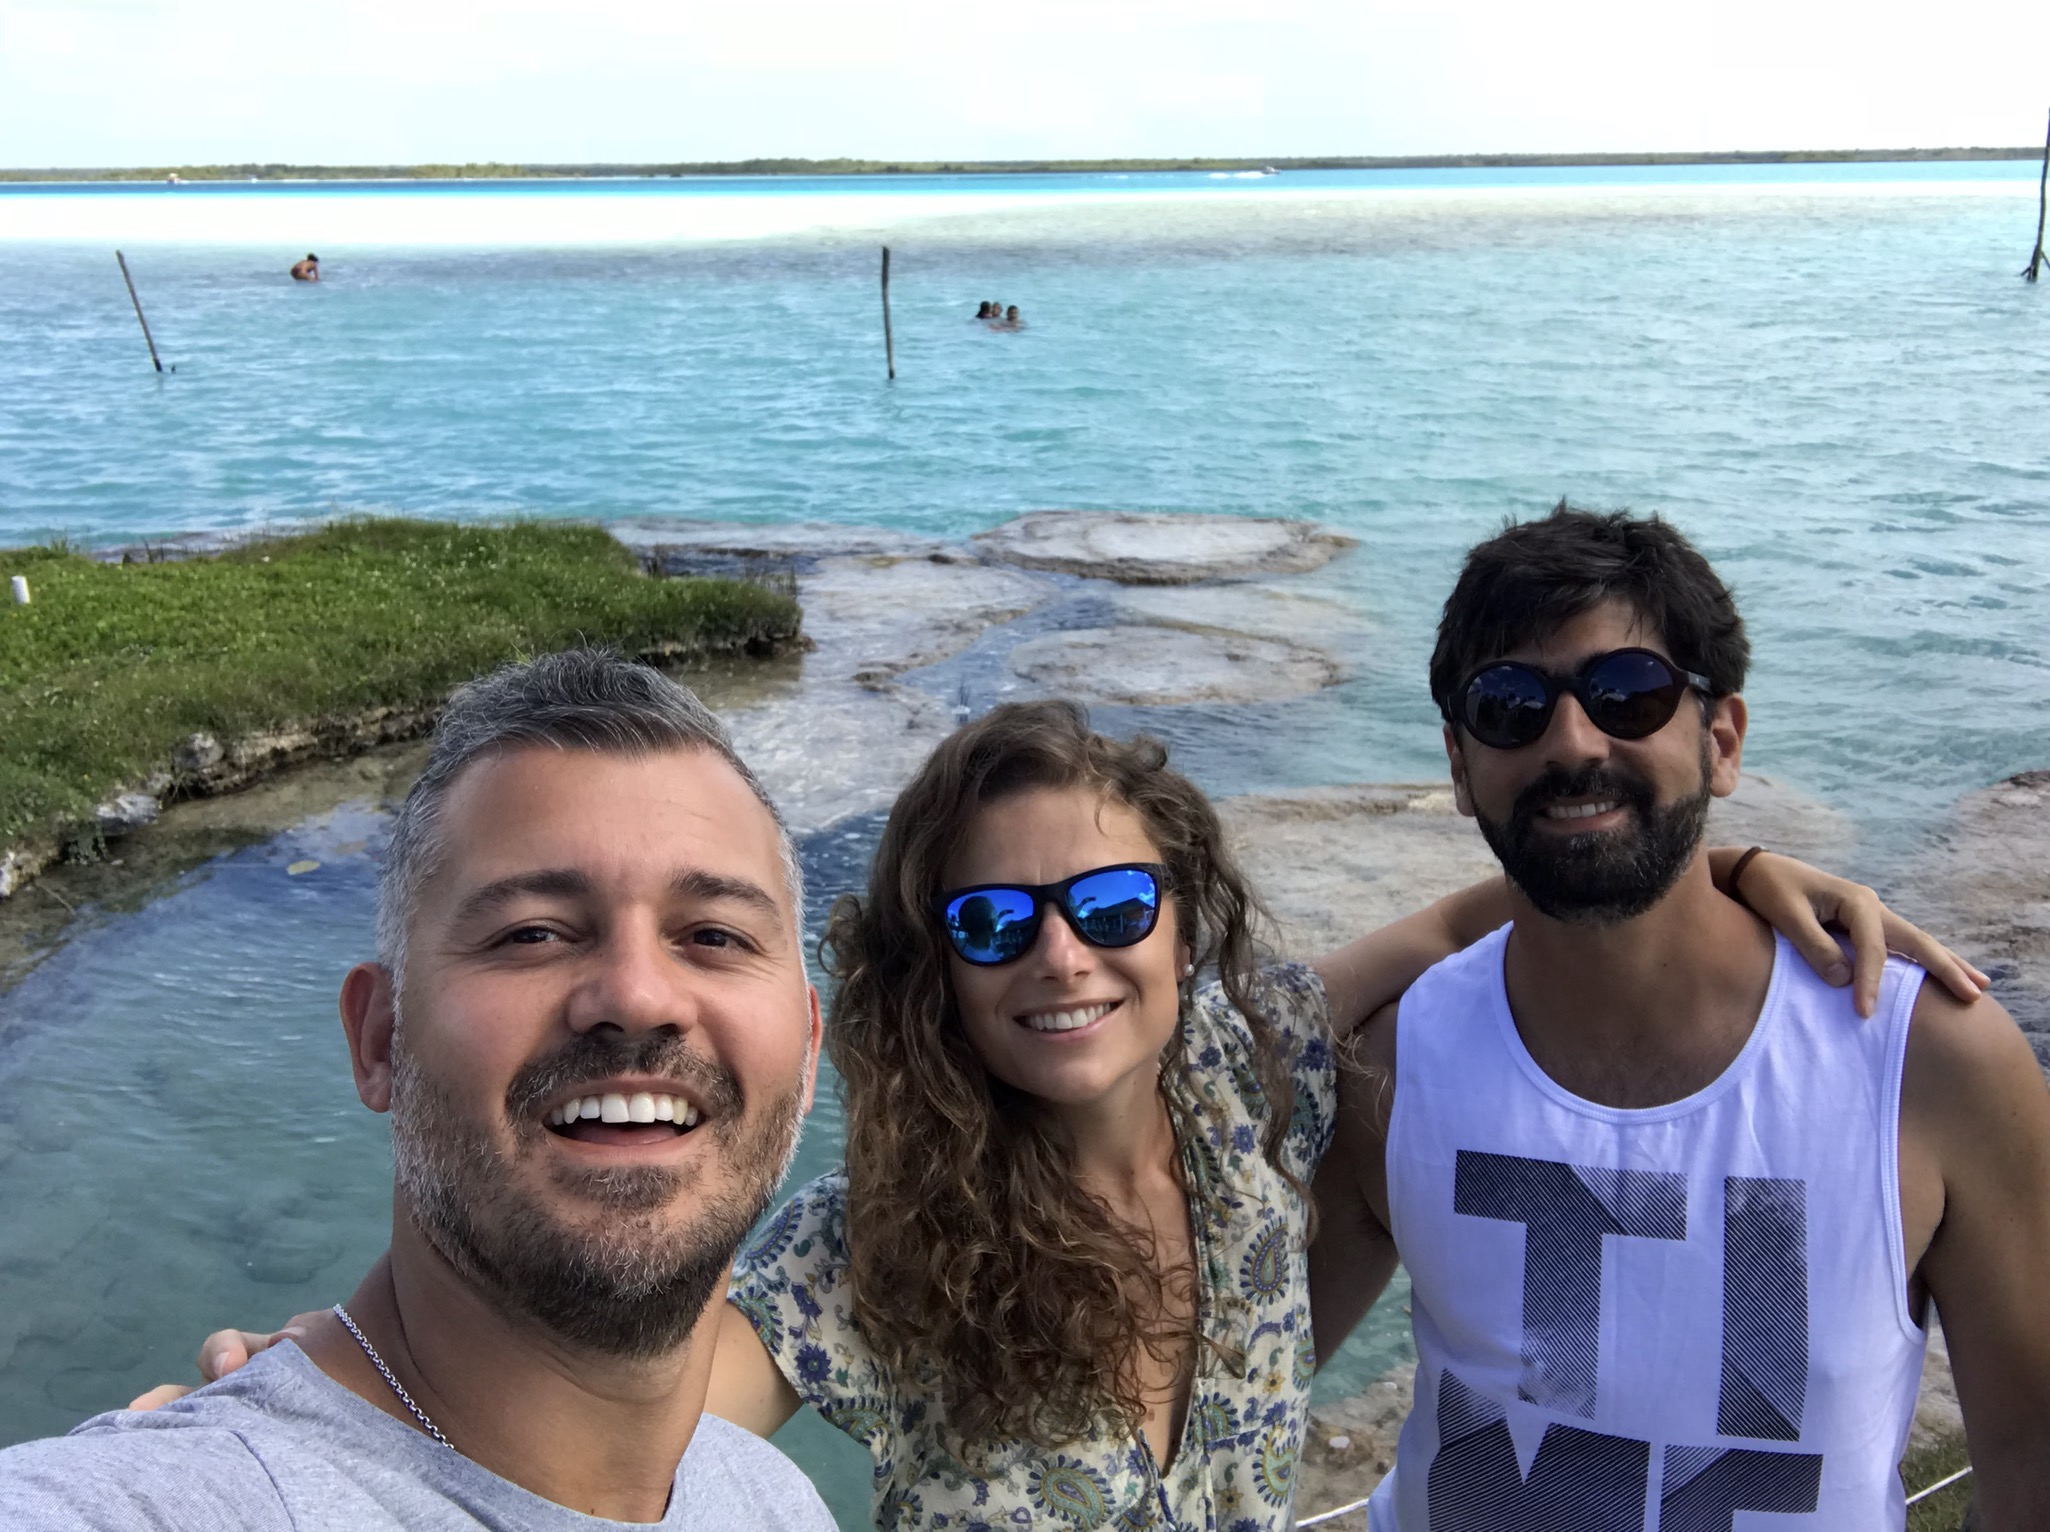 Our favorite spot in Quintana Roo, Lake Bacalar